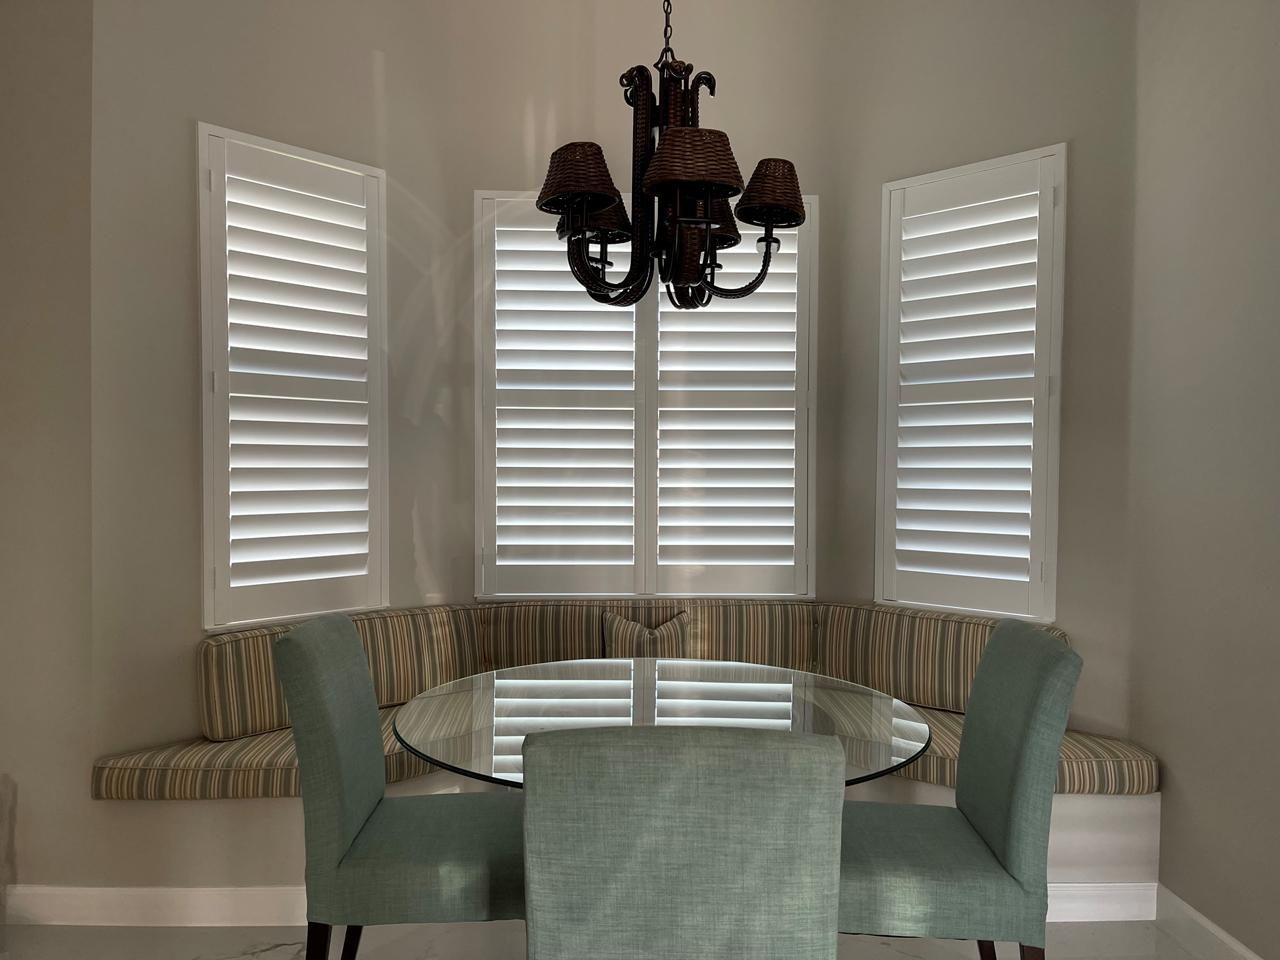 Bay window banquette with shutters